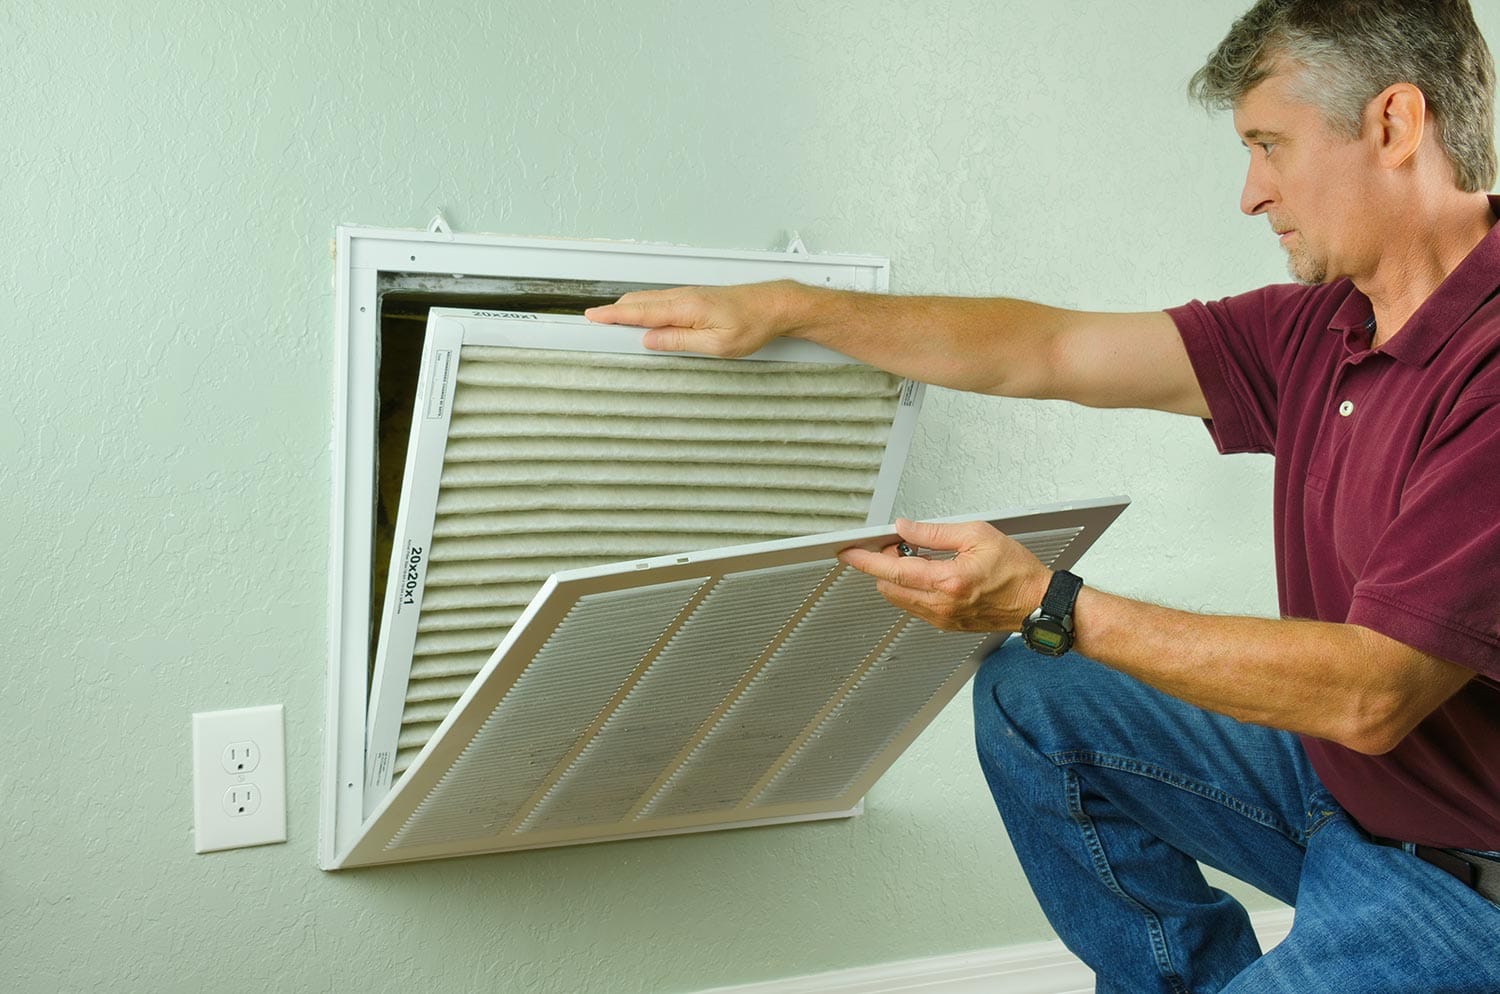 Professional repair service man or diy home owner removing a dirty air filter on a house air conditioner so he can replace it with a new clean one